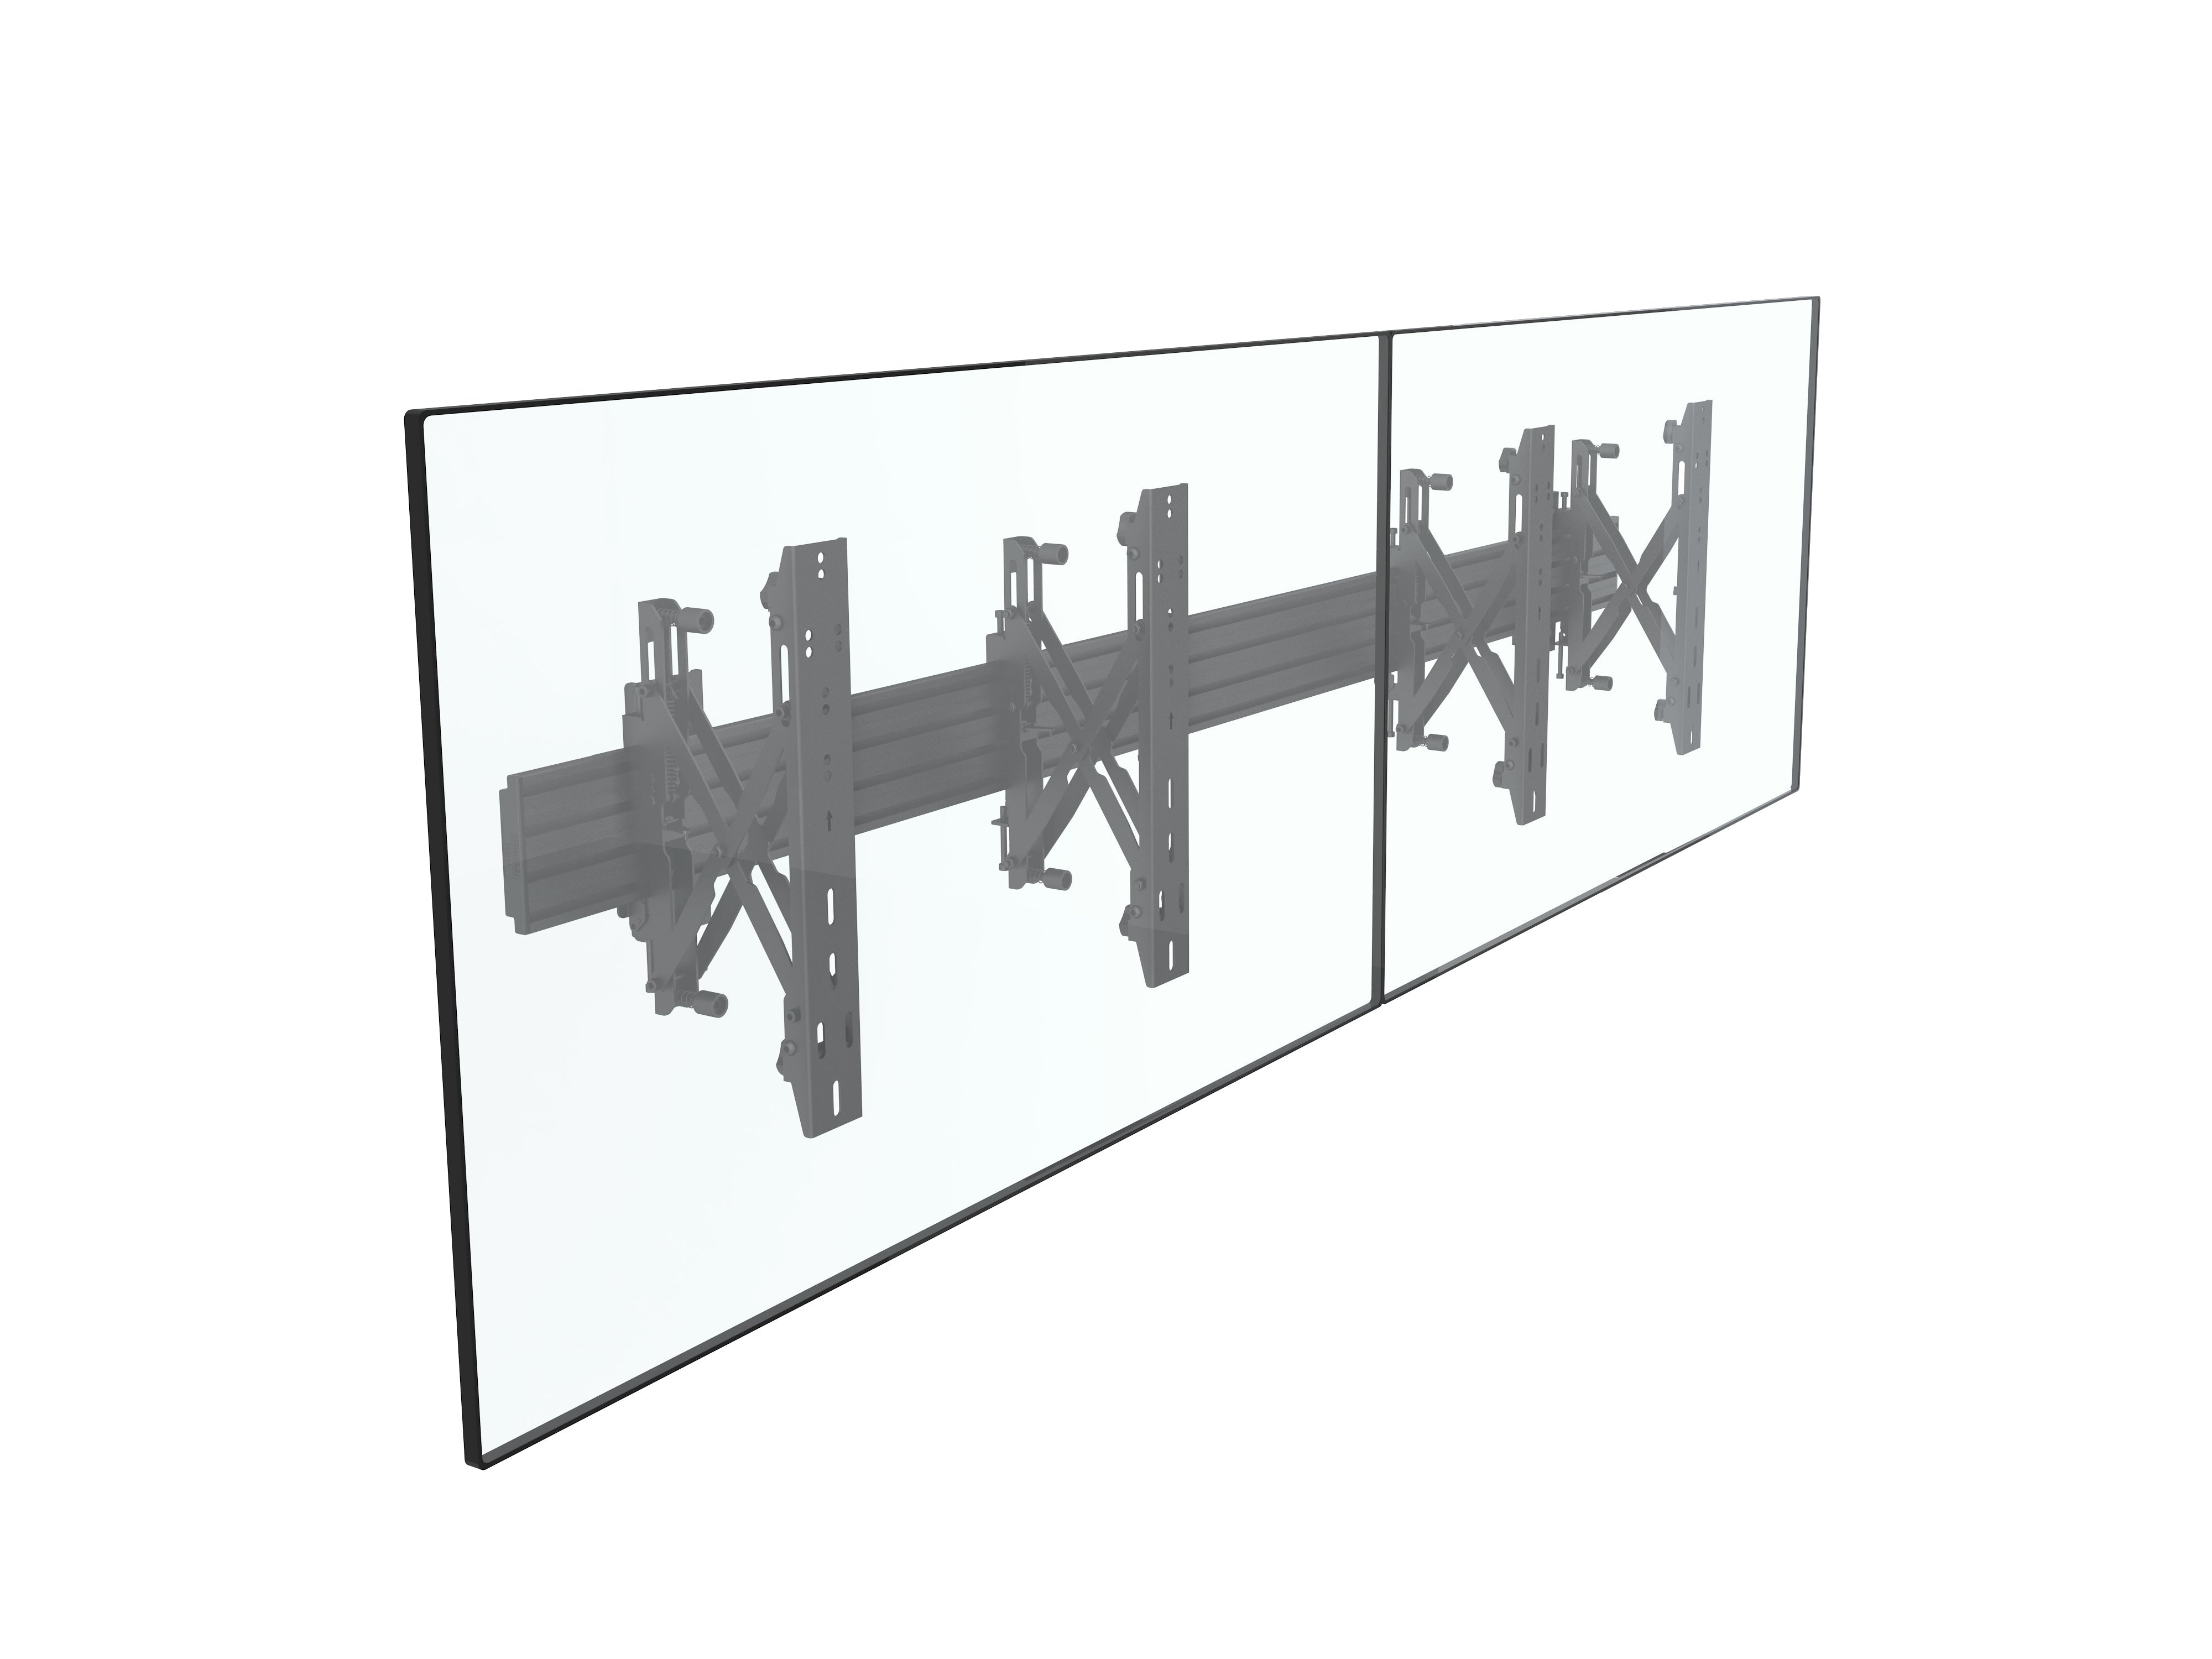 2X1 Video Wall Mount with Push-In Pop-Out Brackets